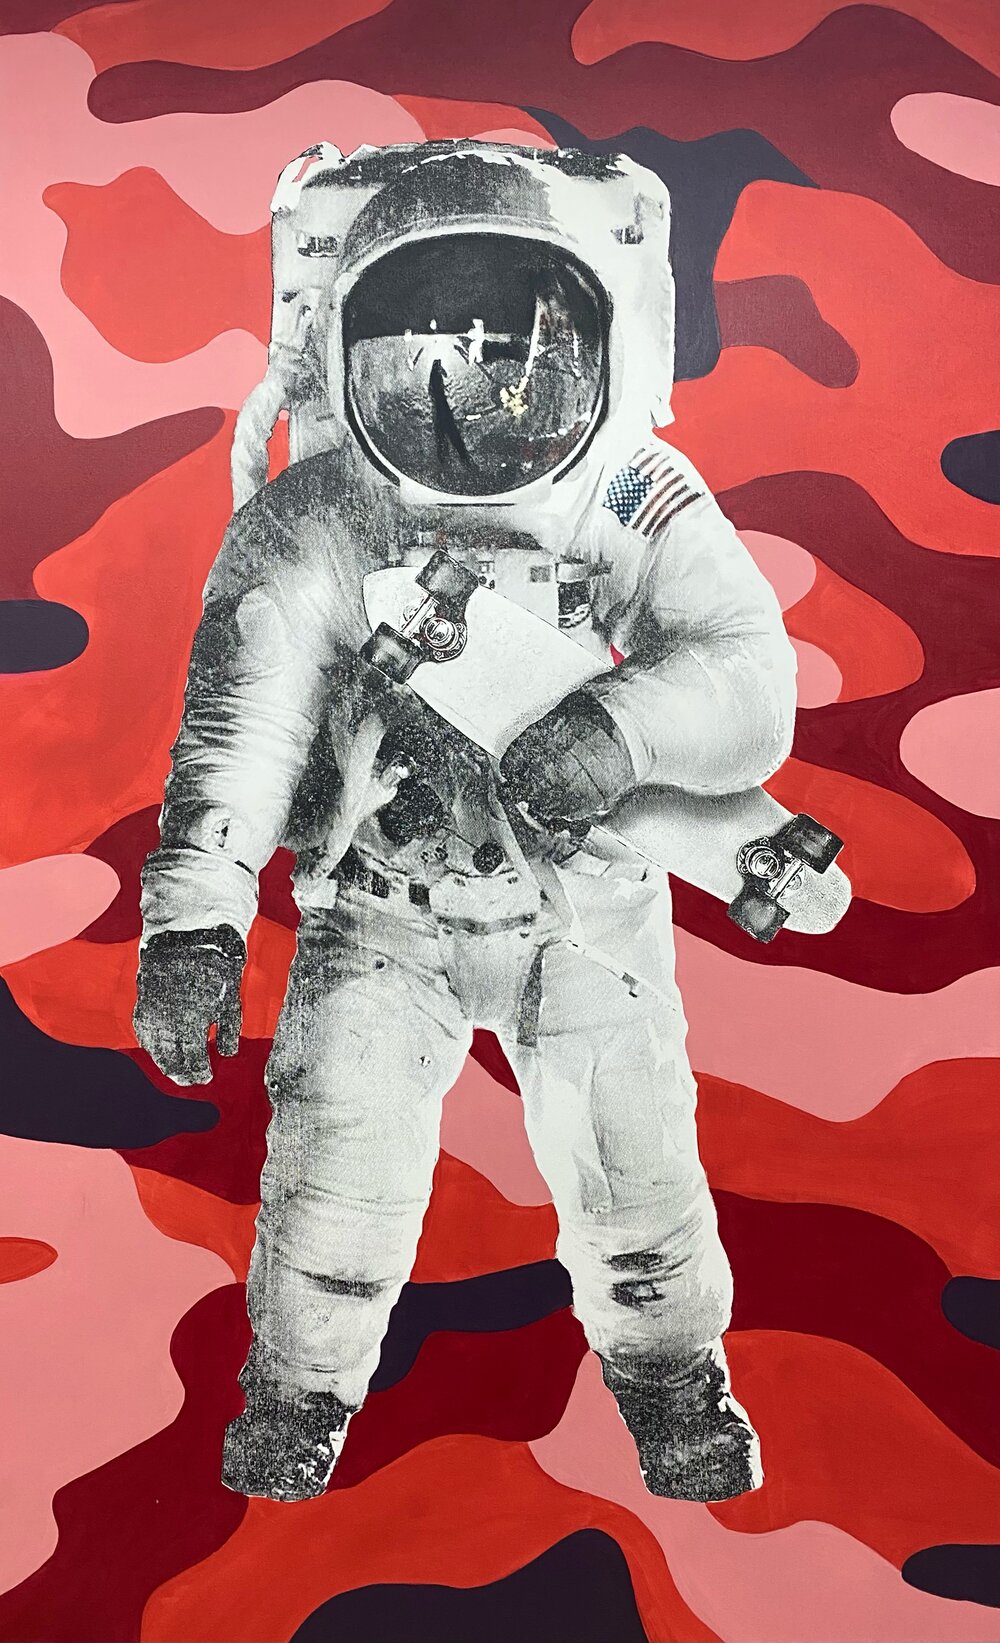   Camo Spaceboarder (Red), 2021   Screen print and acrylic on canvas, 78 x 48 inches 